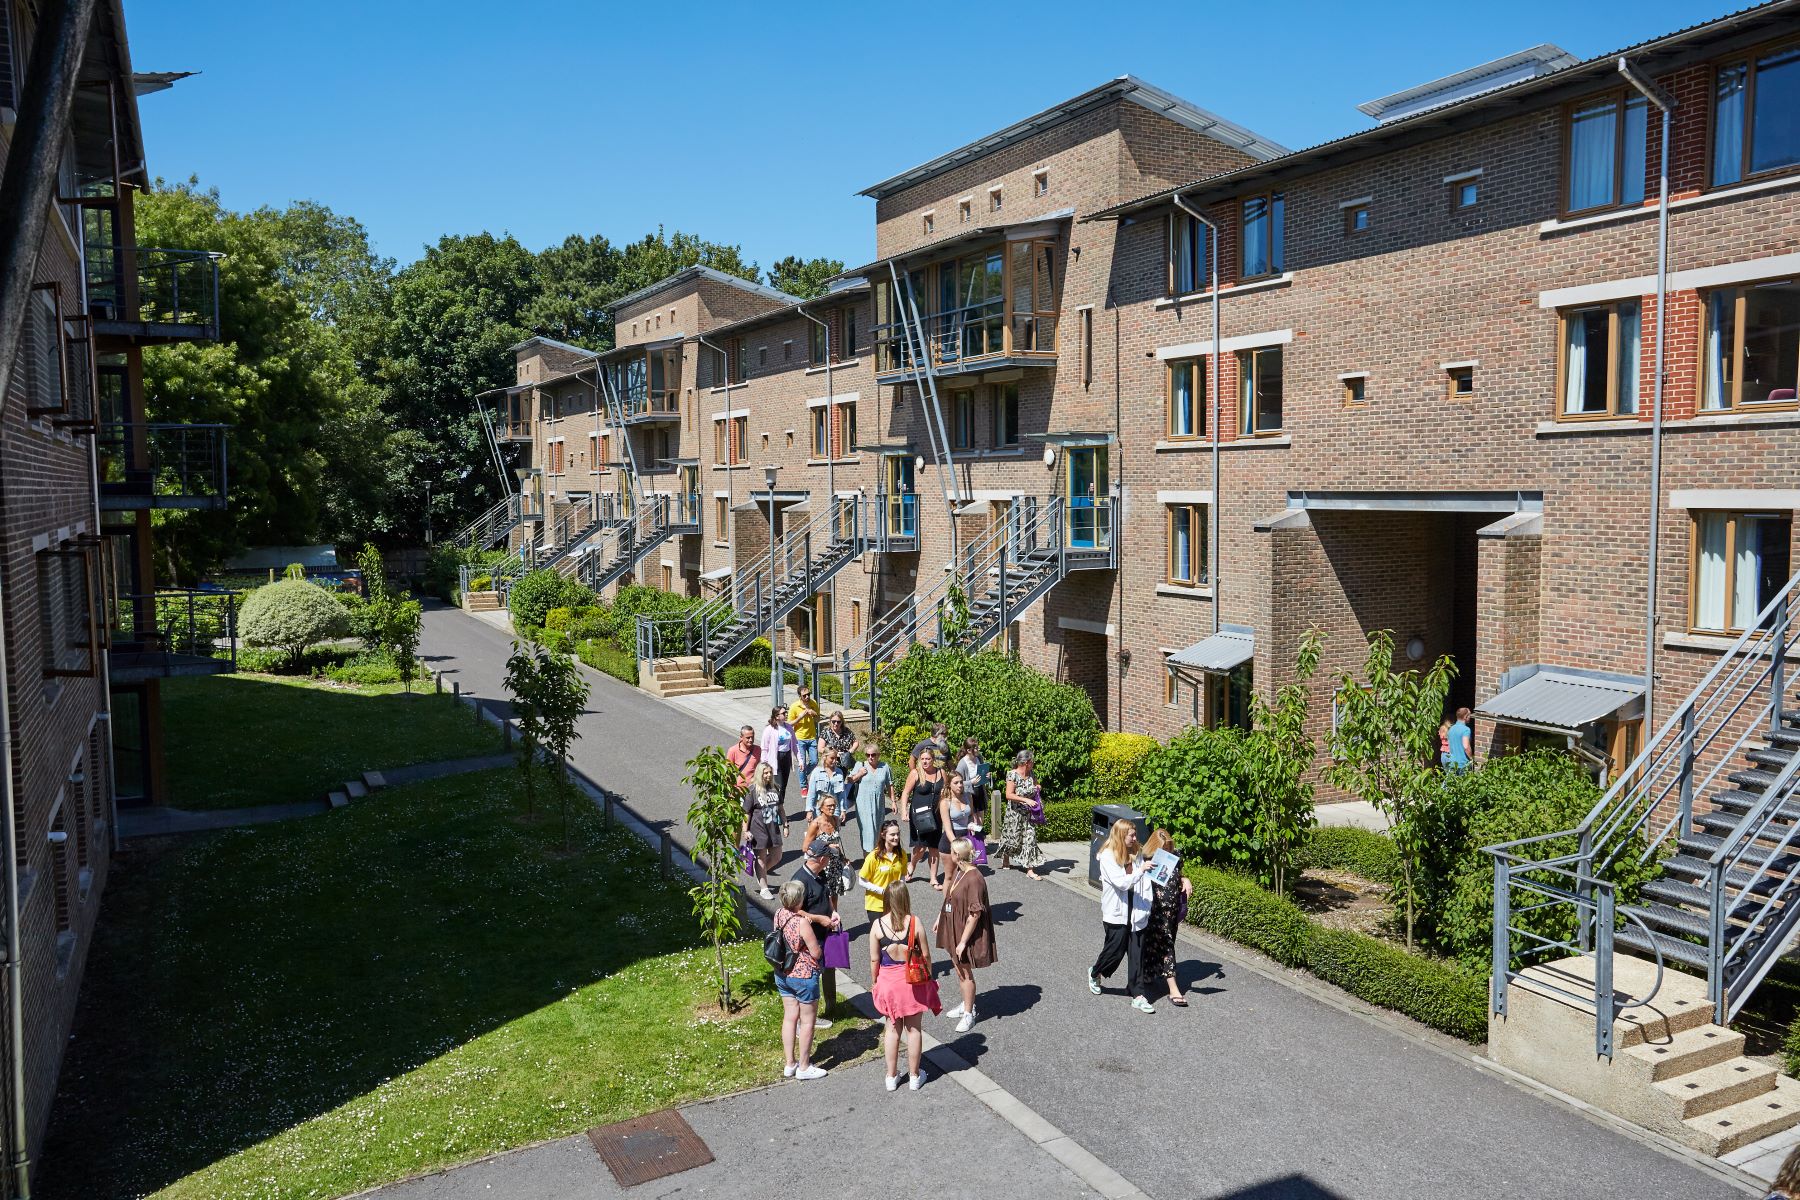 Accommodation blocks with students outside